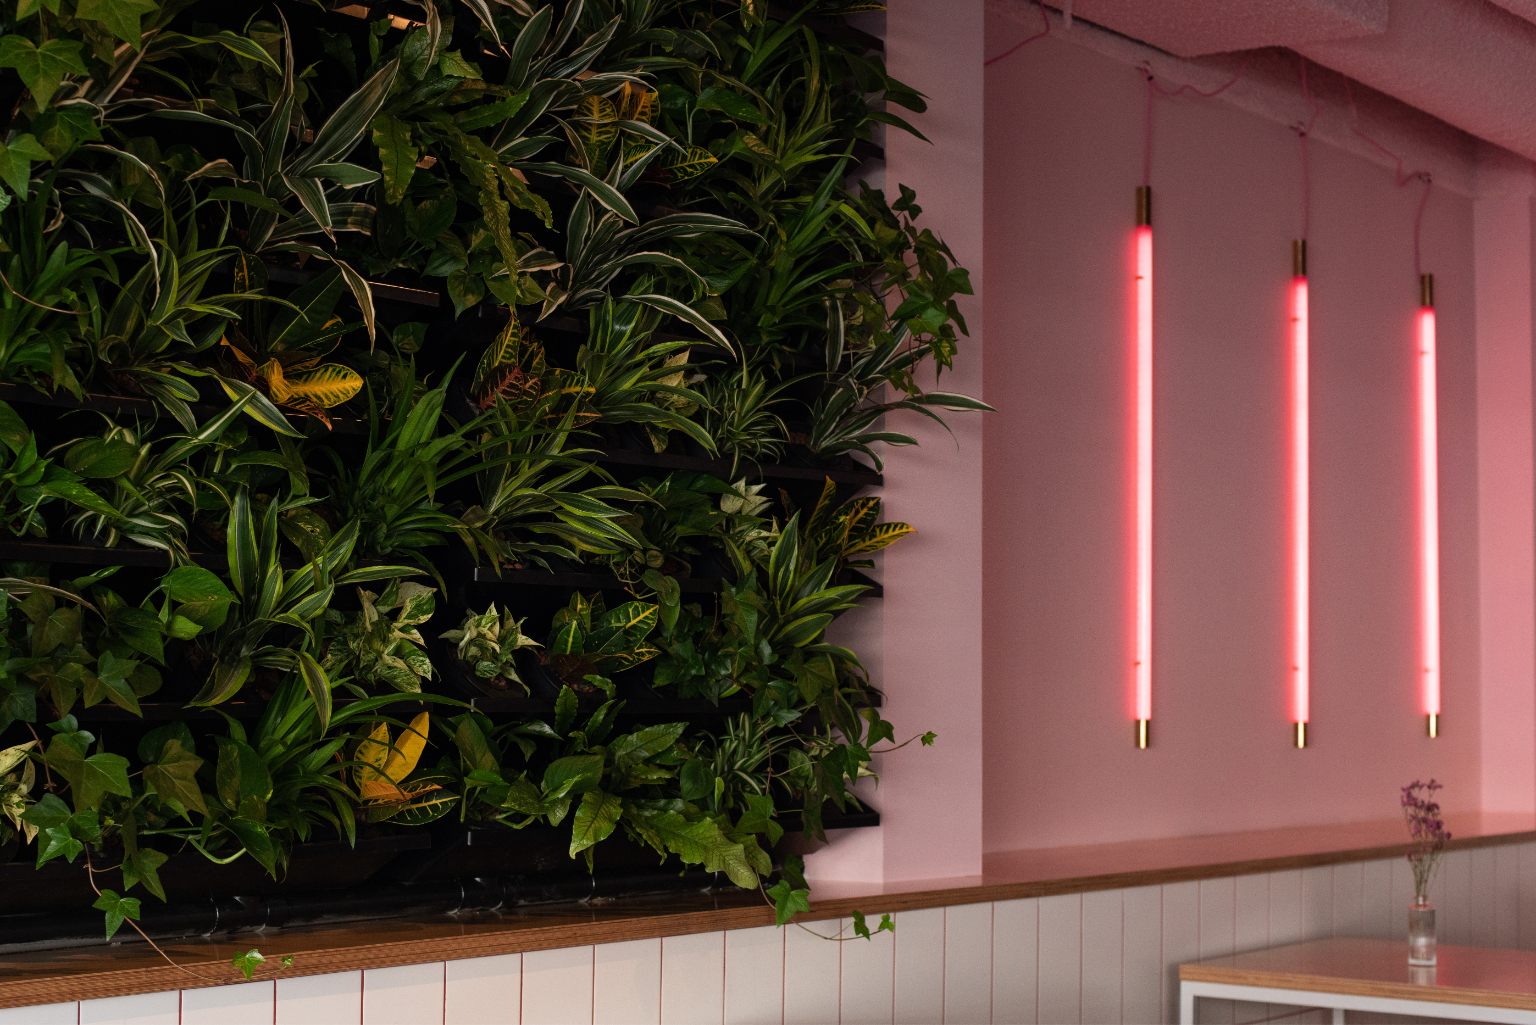 About Conscious Hotels - Green Plant Wall - Over Conscious Hotels Groene planten Muur